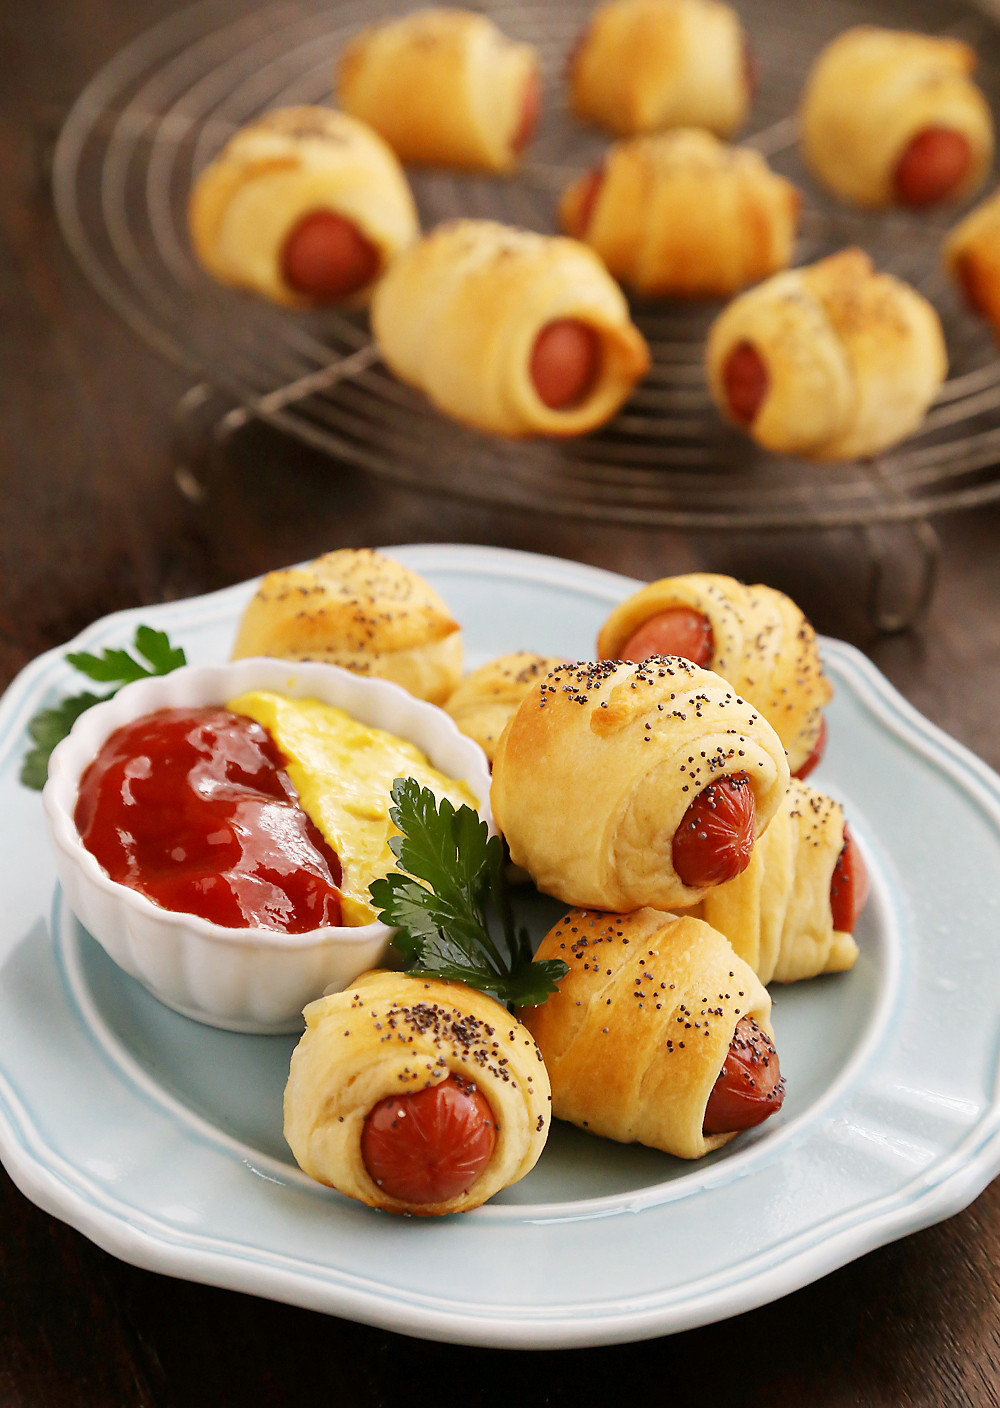 Appetizers Using Crescent Rolls
 3 Ingre nt Crescent Hot Dog Rollups